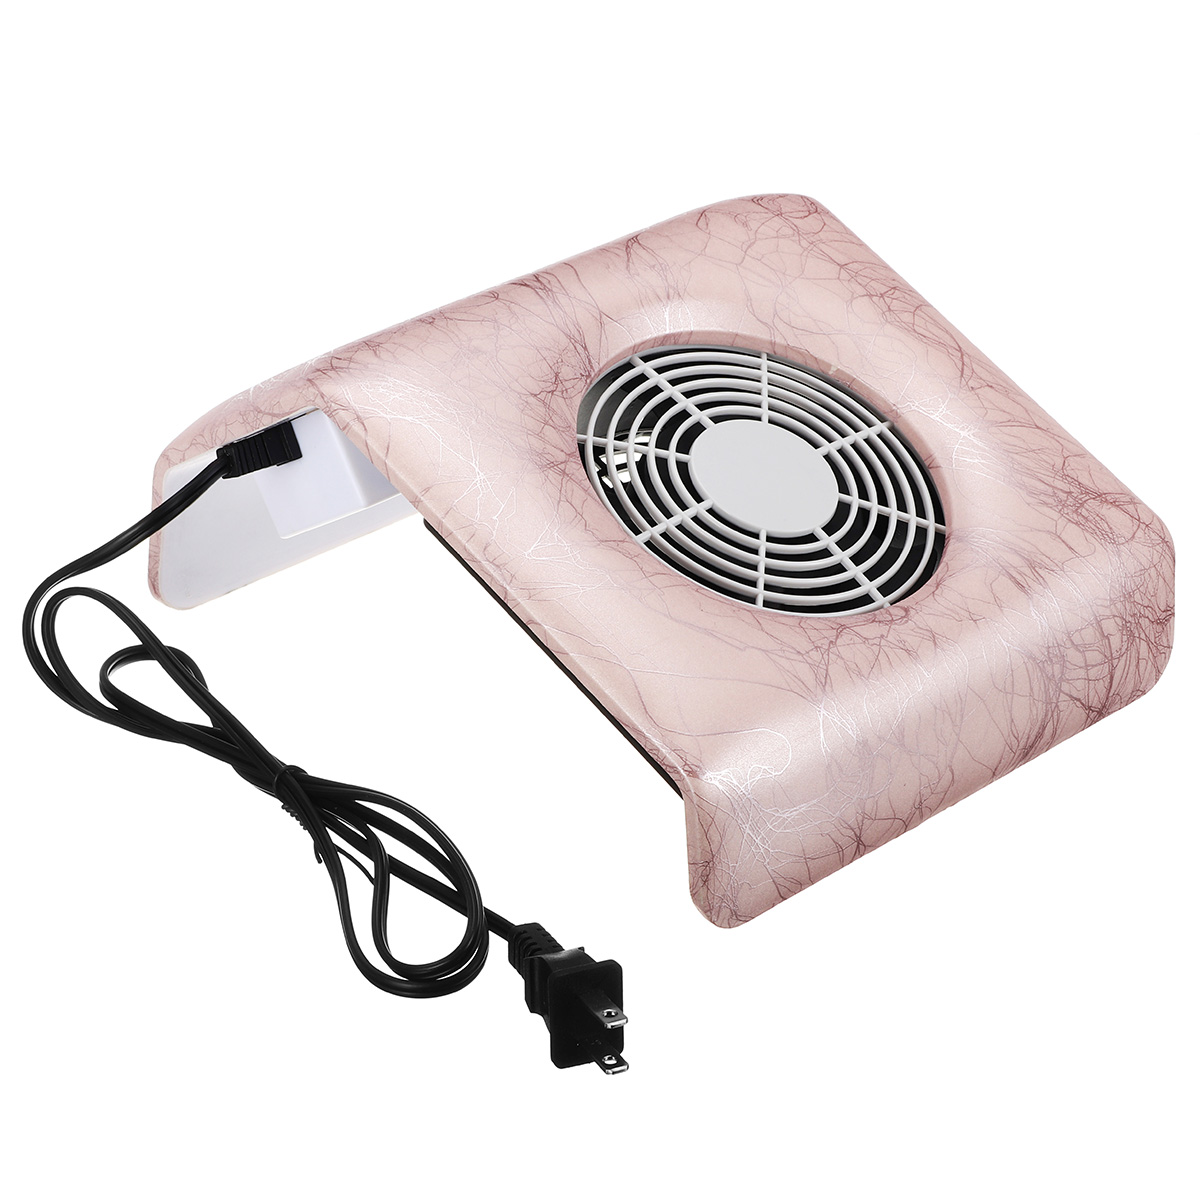 40W-High-Power-Vacuum-Nail-Dust-Collector-For-Manicure-Nails-Collector-With-Fitter-Nail-Dust-Fan-Vac-1940609-9